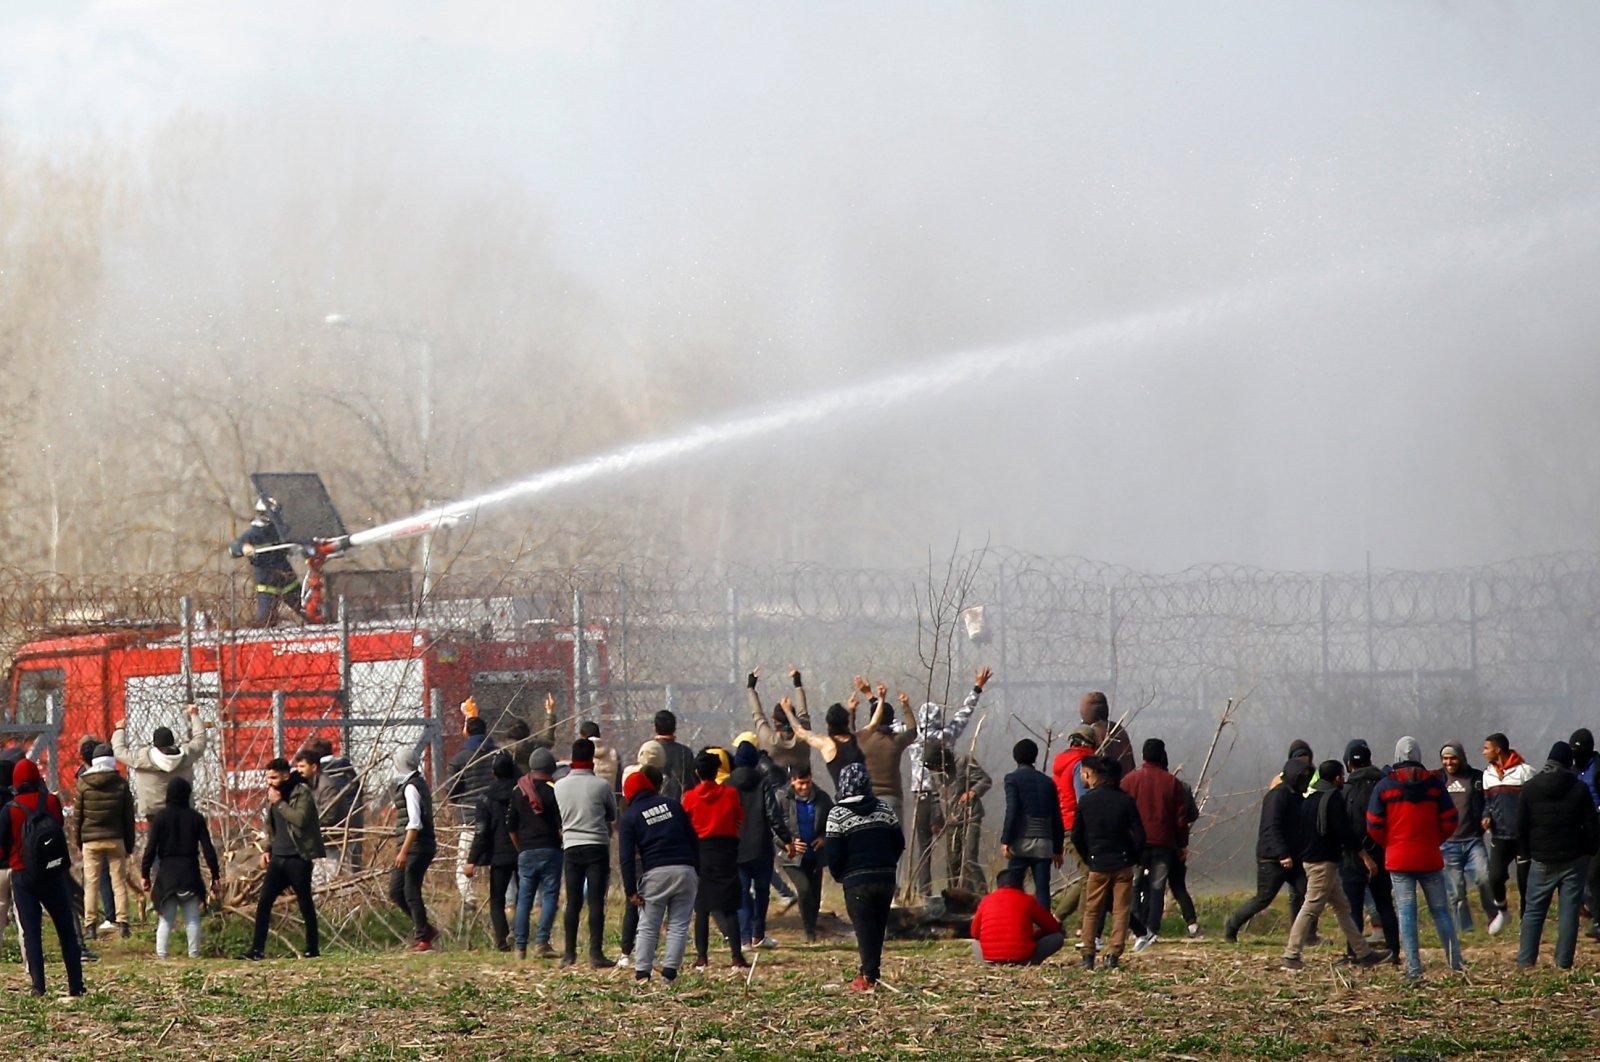 A Greek firefighter uses a water cannon as migrants gather on the Turkish-Greek border near Turkey's Pazarkule border crossing with Greece's Kastanies, in Edirne, Turkey, March 7, 2020. (Reuters File Photo)